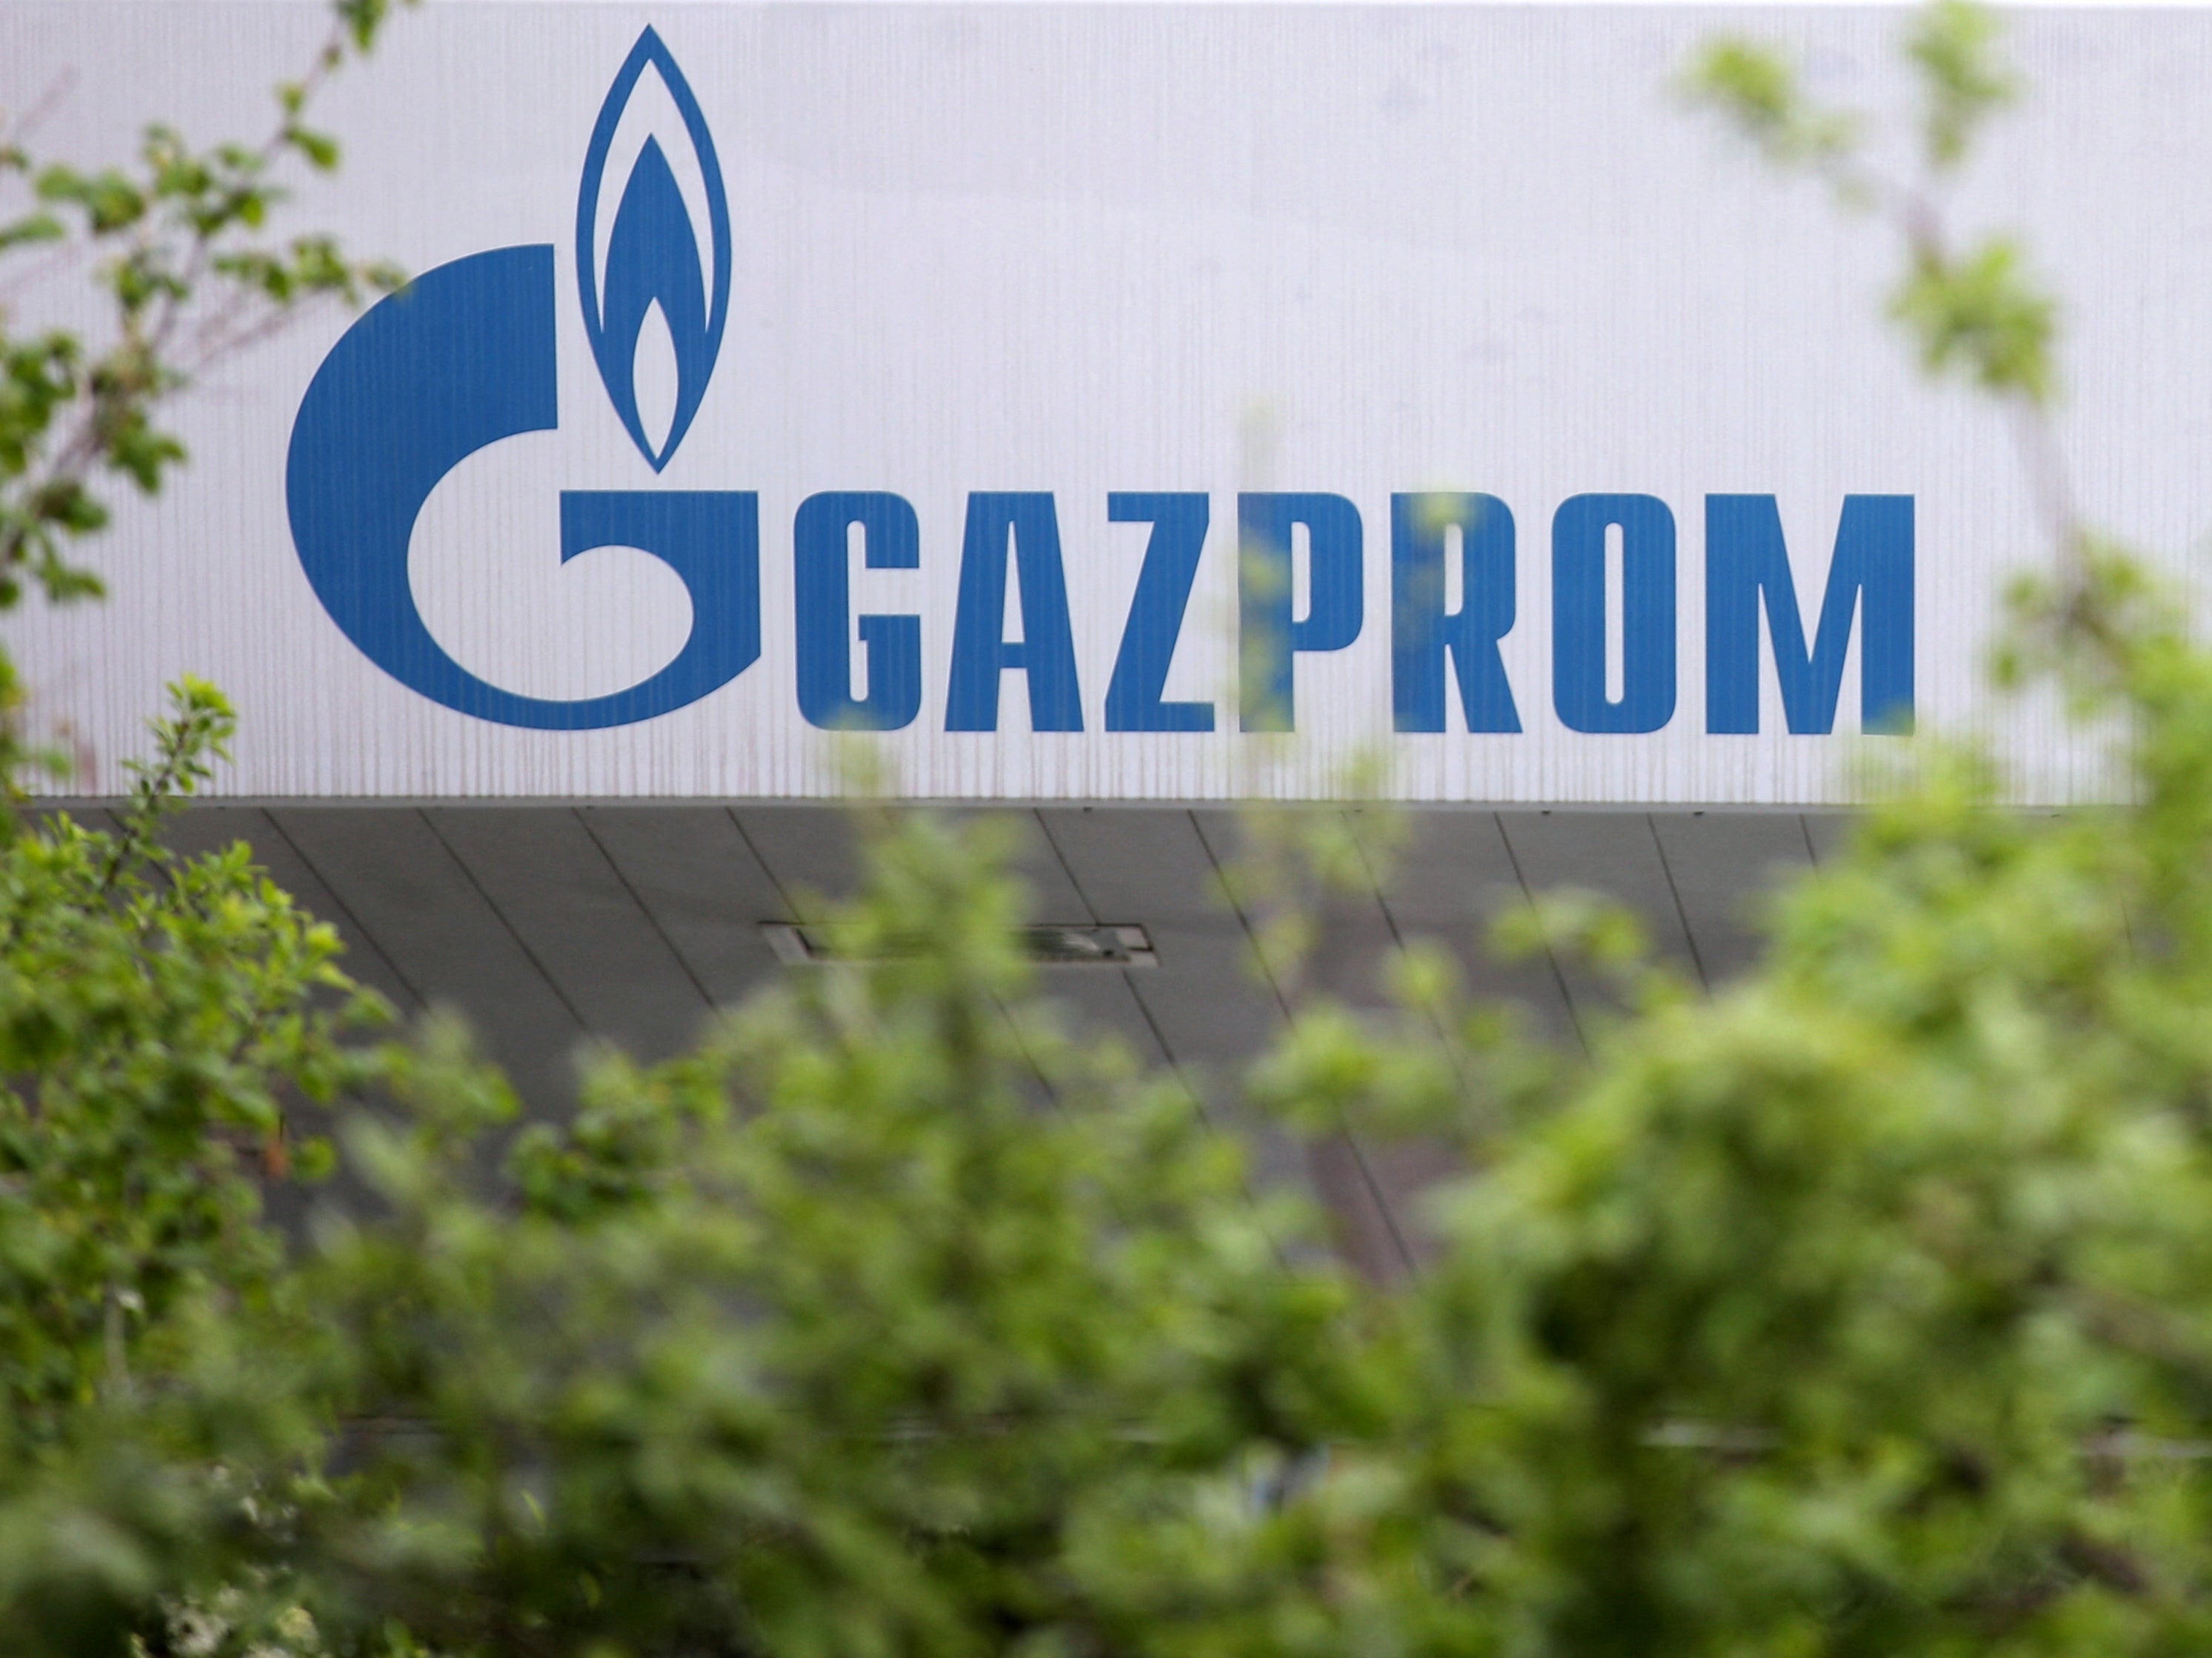 Russian energy giant Gazprom has said it has not received proof of force majeure which would allow Ukraine to block gas supply